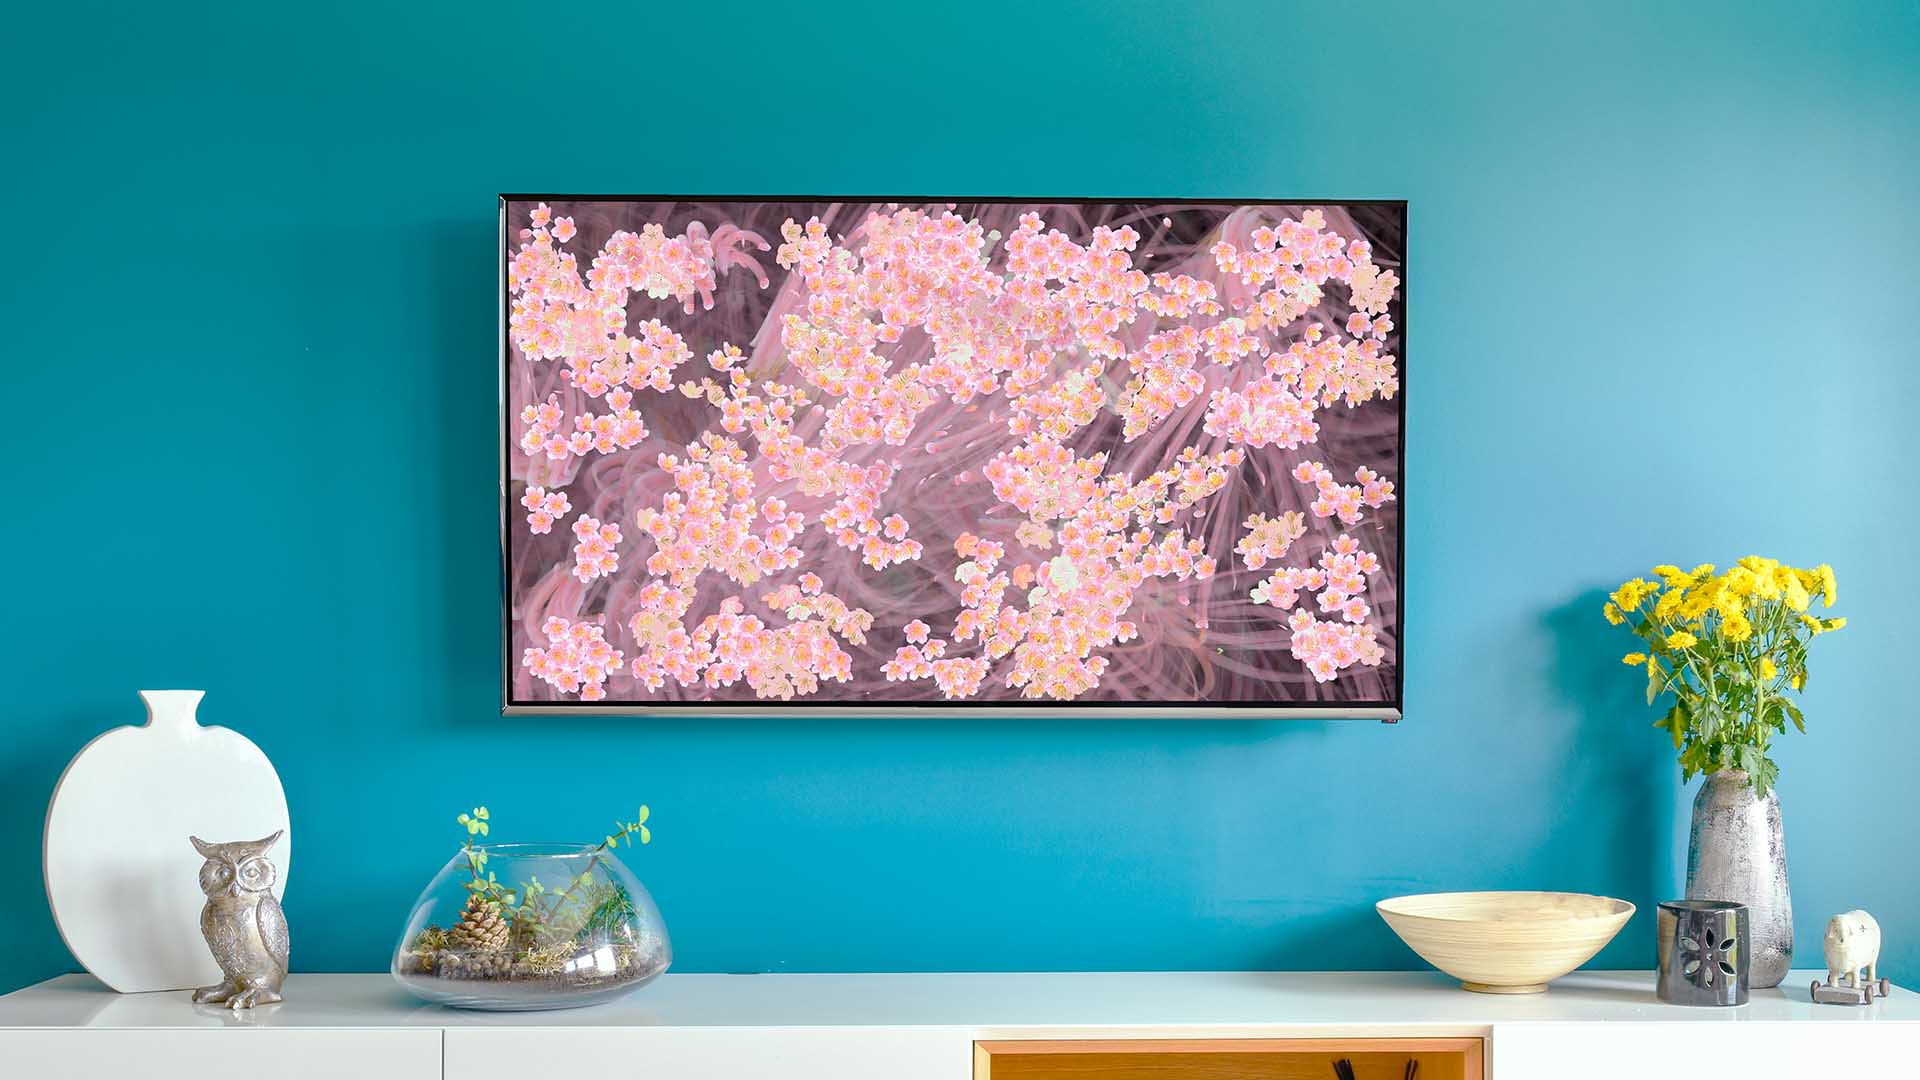 Teamlab's New 'Sakura Bombing Home' Artwork Will Fill Your TV Screen with Cherry Blossoms